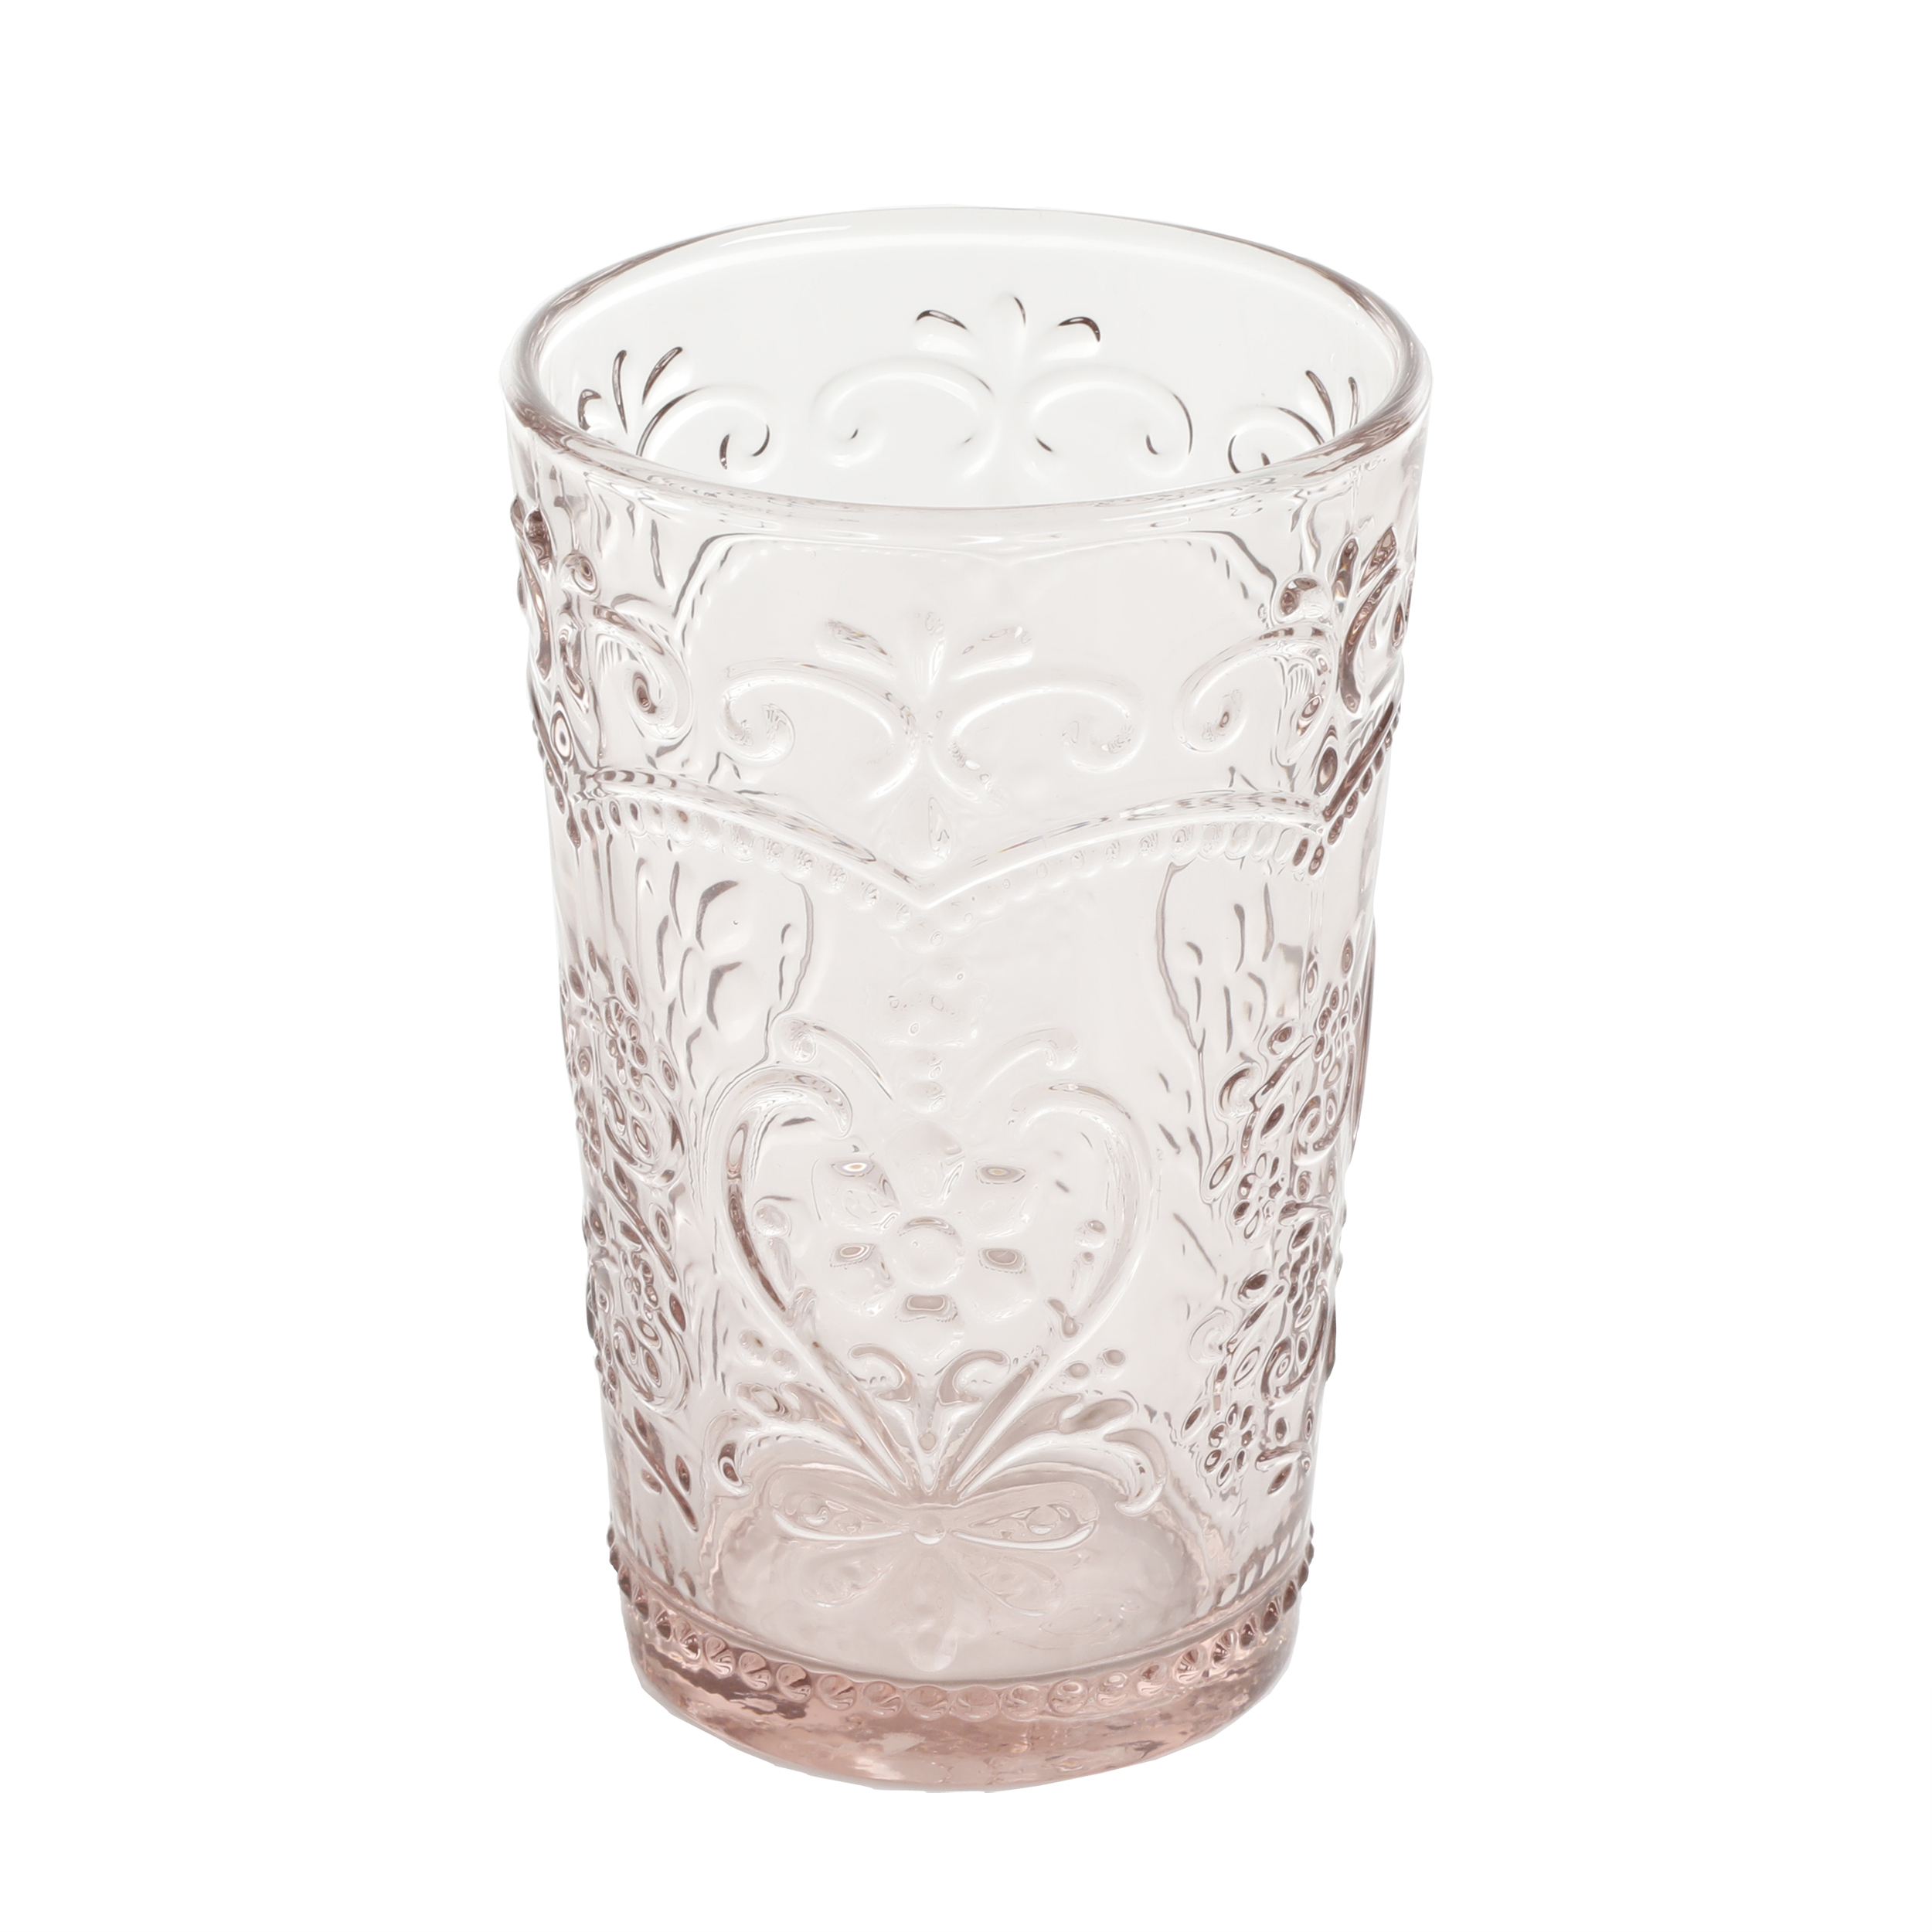 The Pioneer Woman Amelia Pink 15.22-Ounce Glass Tumblers, Set of 4 - image 4 of 4